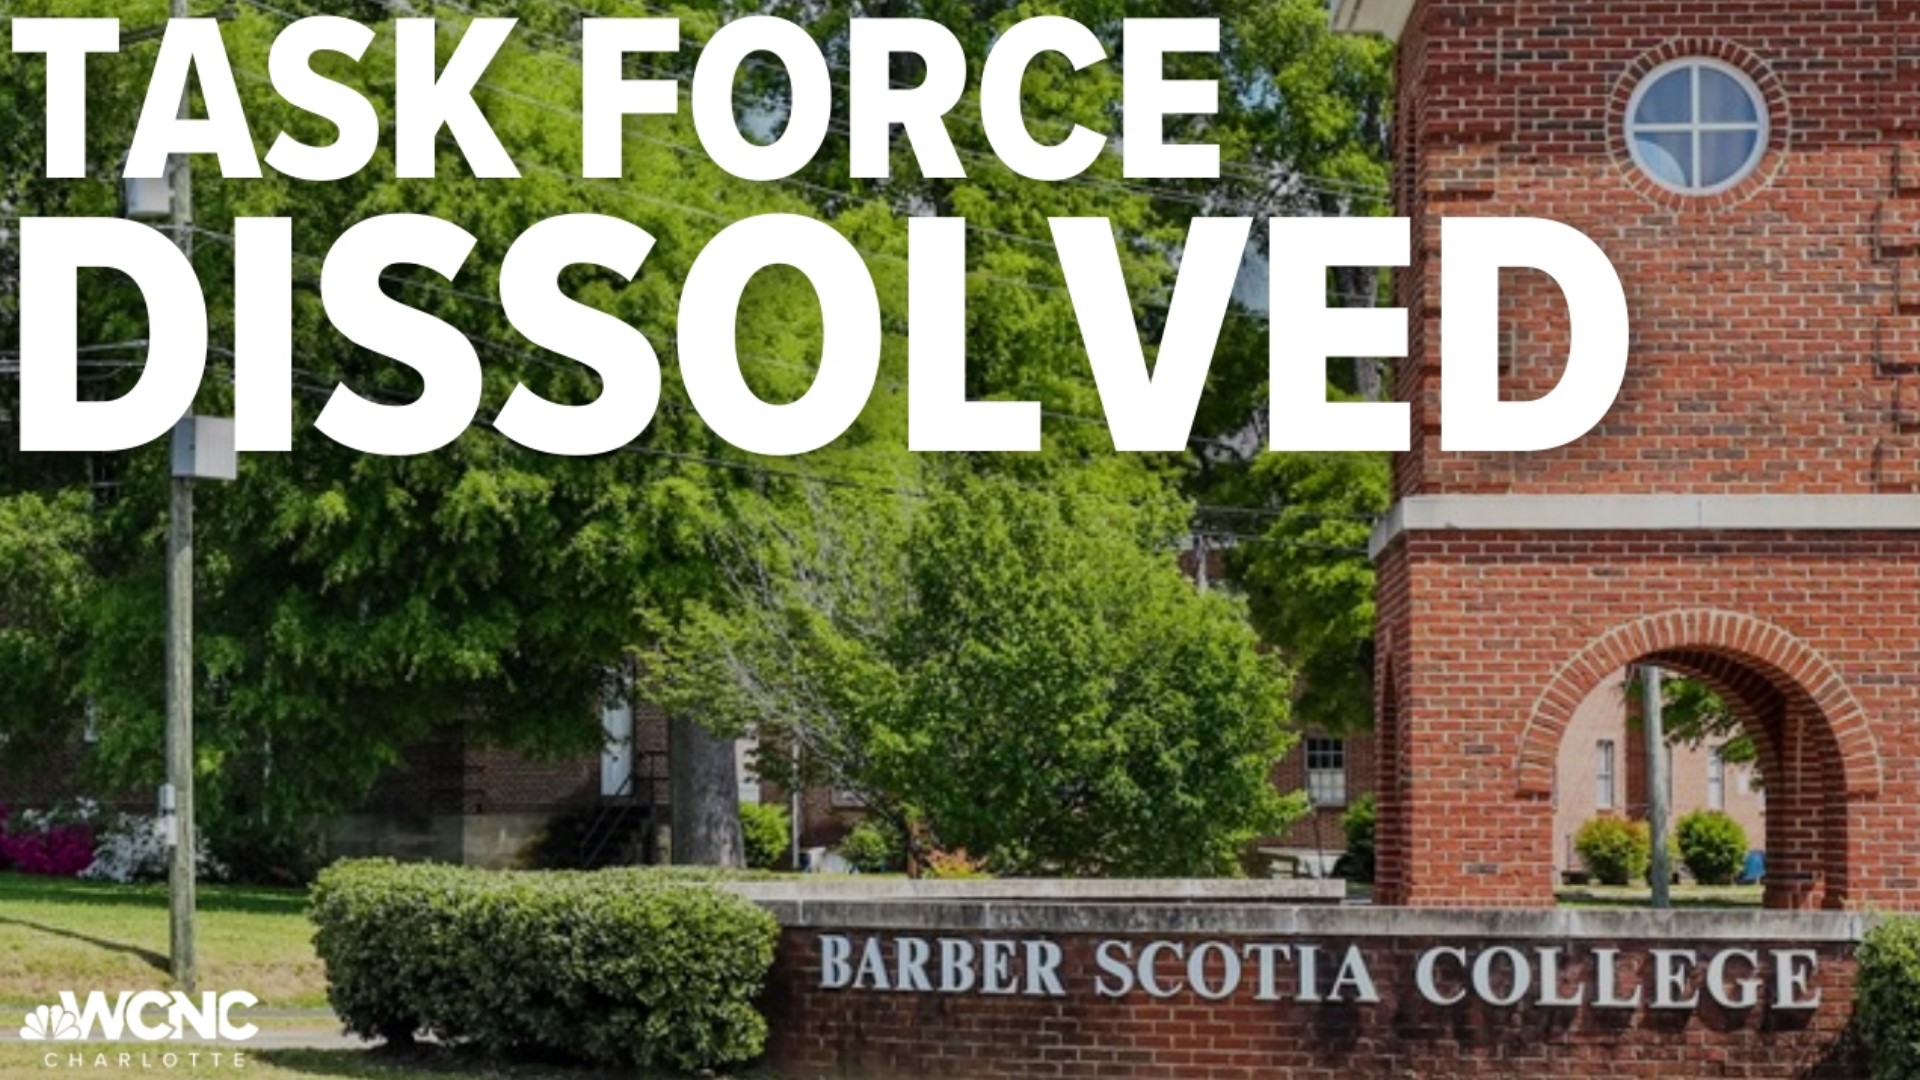 The community task force implemented to revitalize Barber-Scotia College has been dissolved, Concord city officials announced Thursday.